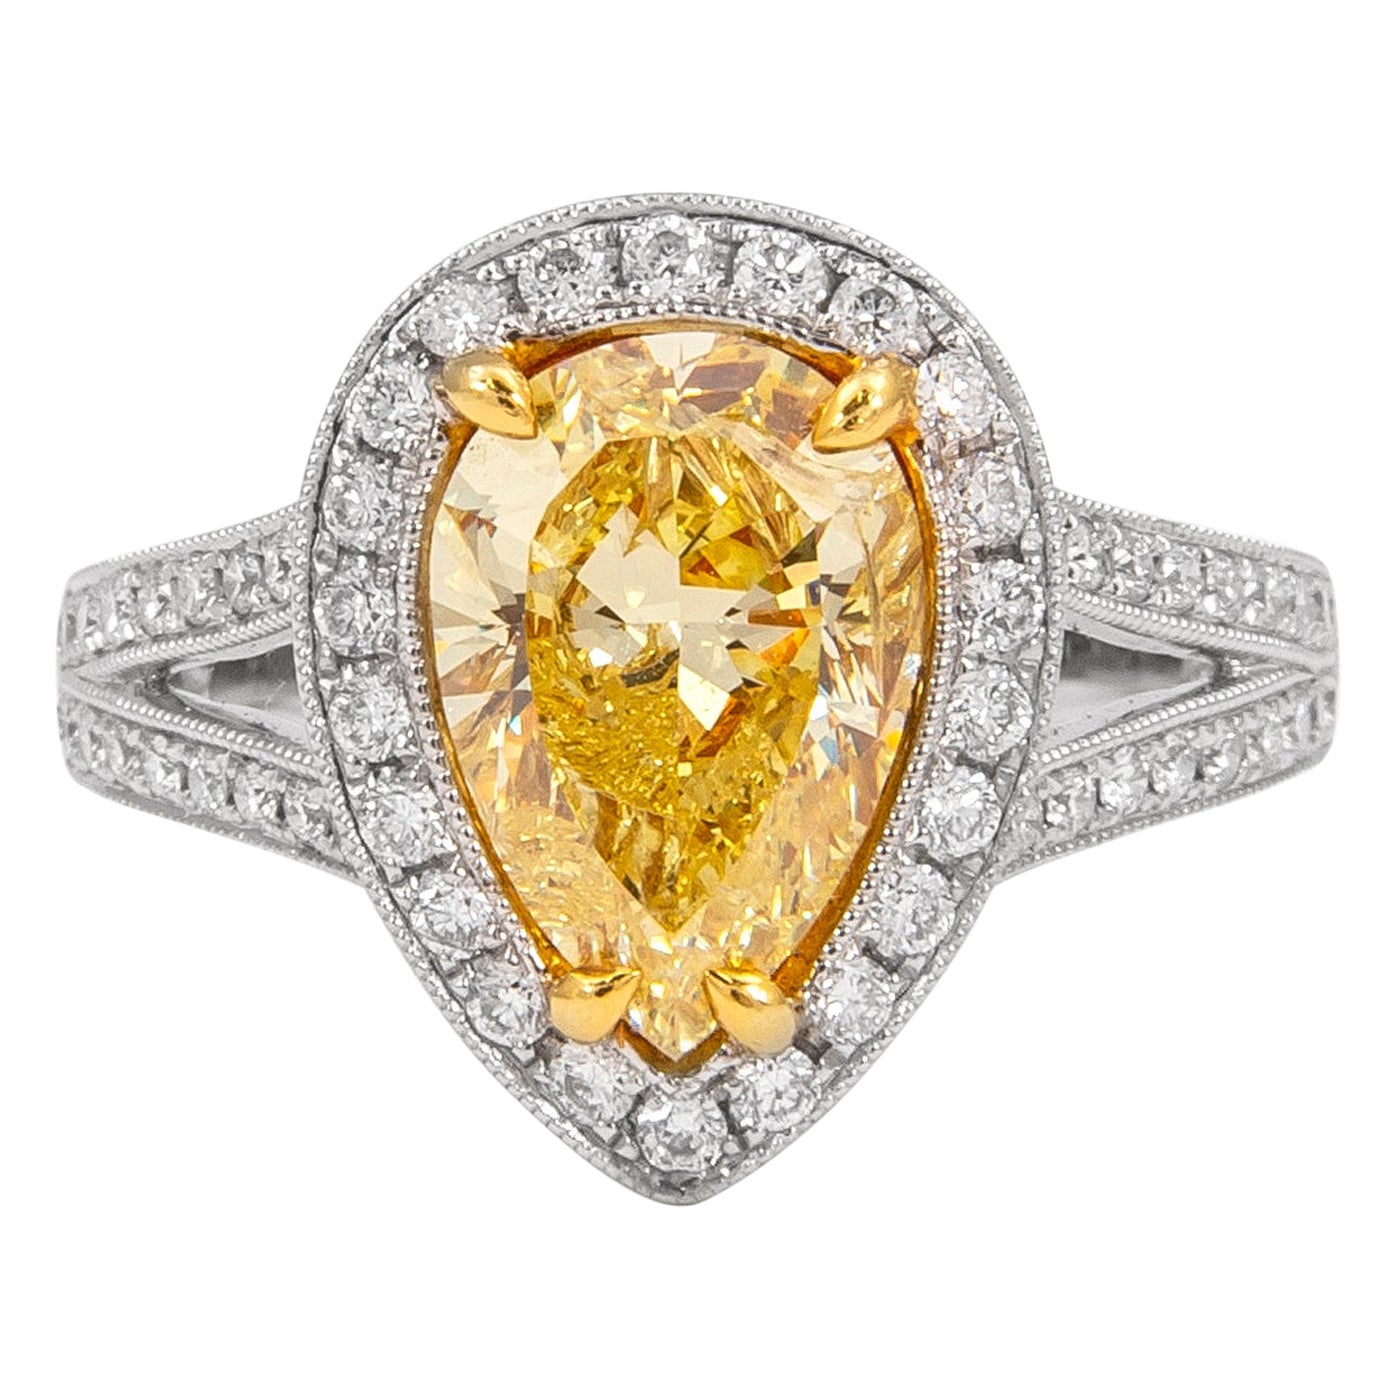 Alexander EGL 2.50ct Fancy Vivid Yellow Pear Diamond with Halo Ring 18k For Sale